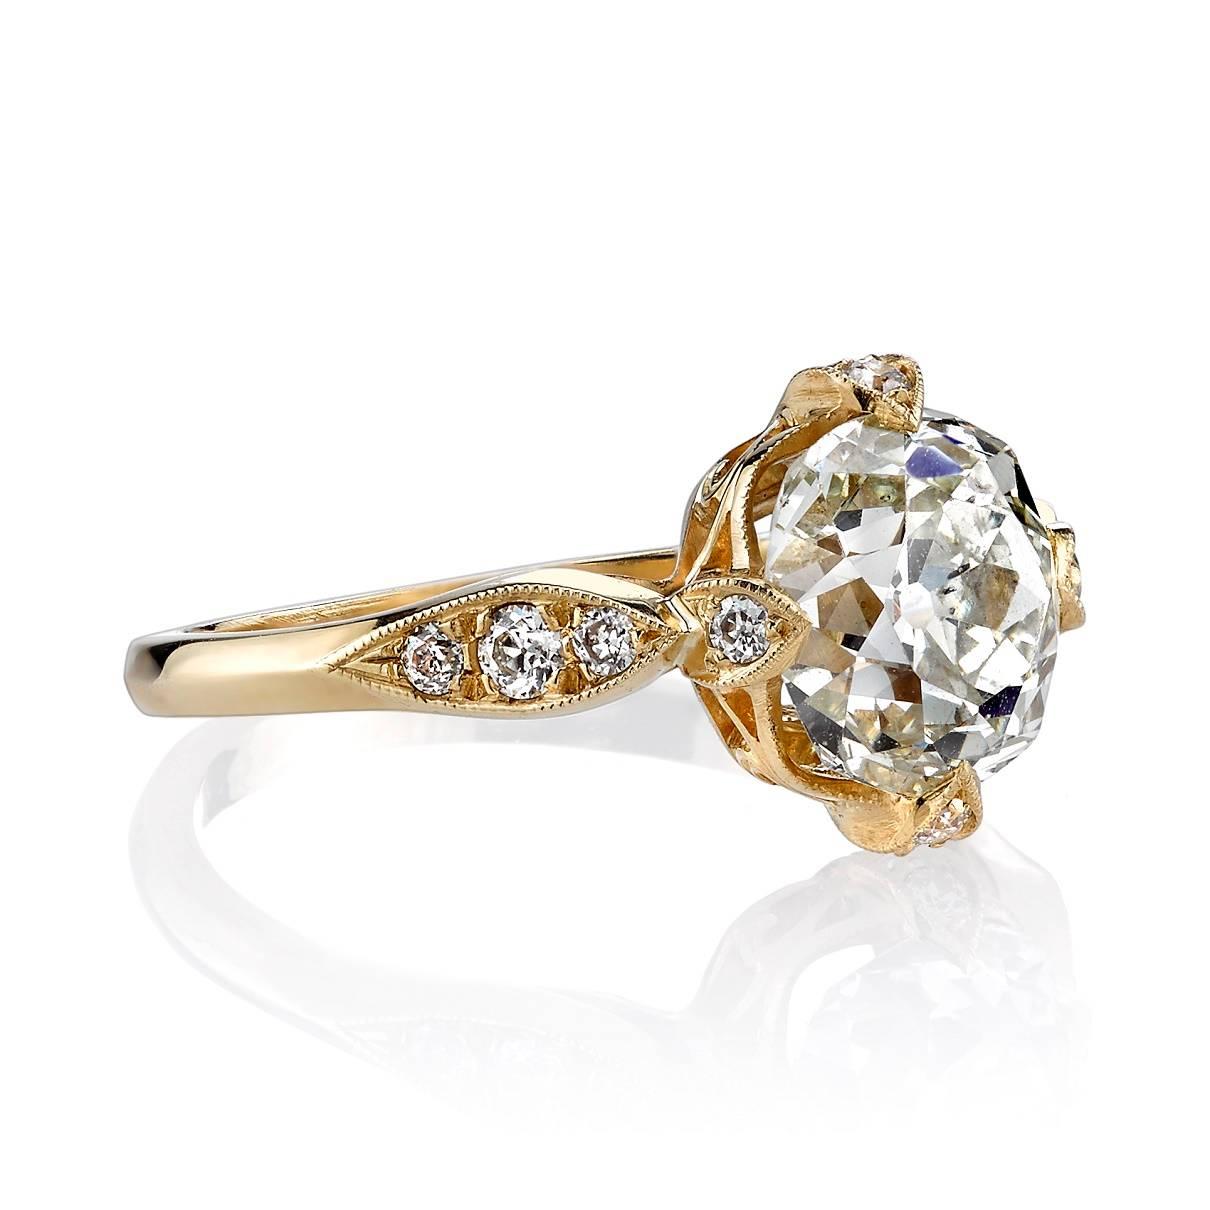 2.32ct K/SI1 EGL certified vintage Cushion cut diamond set in a handcrafted 18k yellow gold mounting.